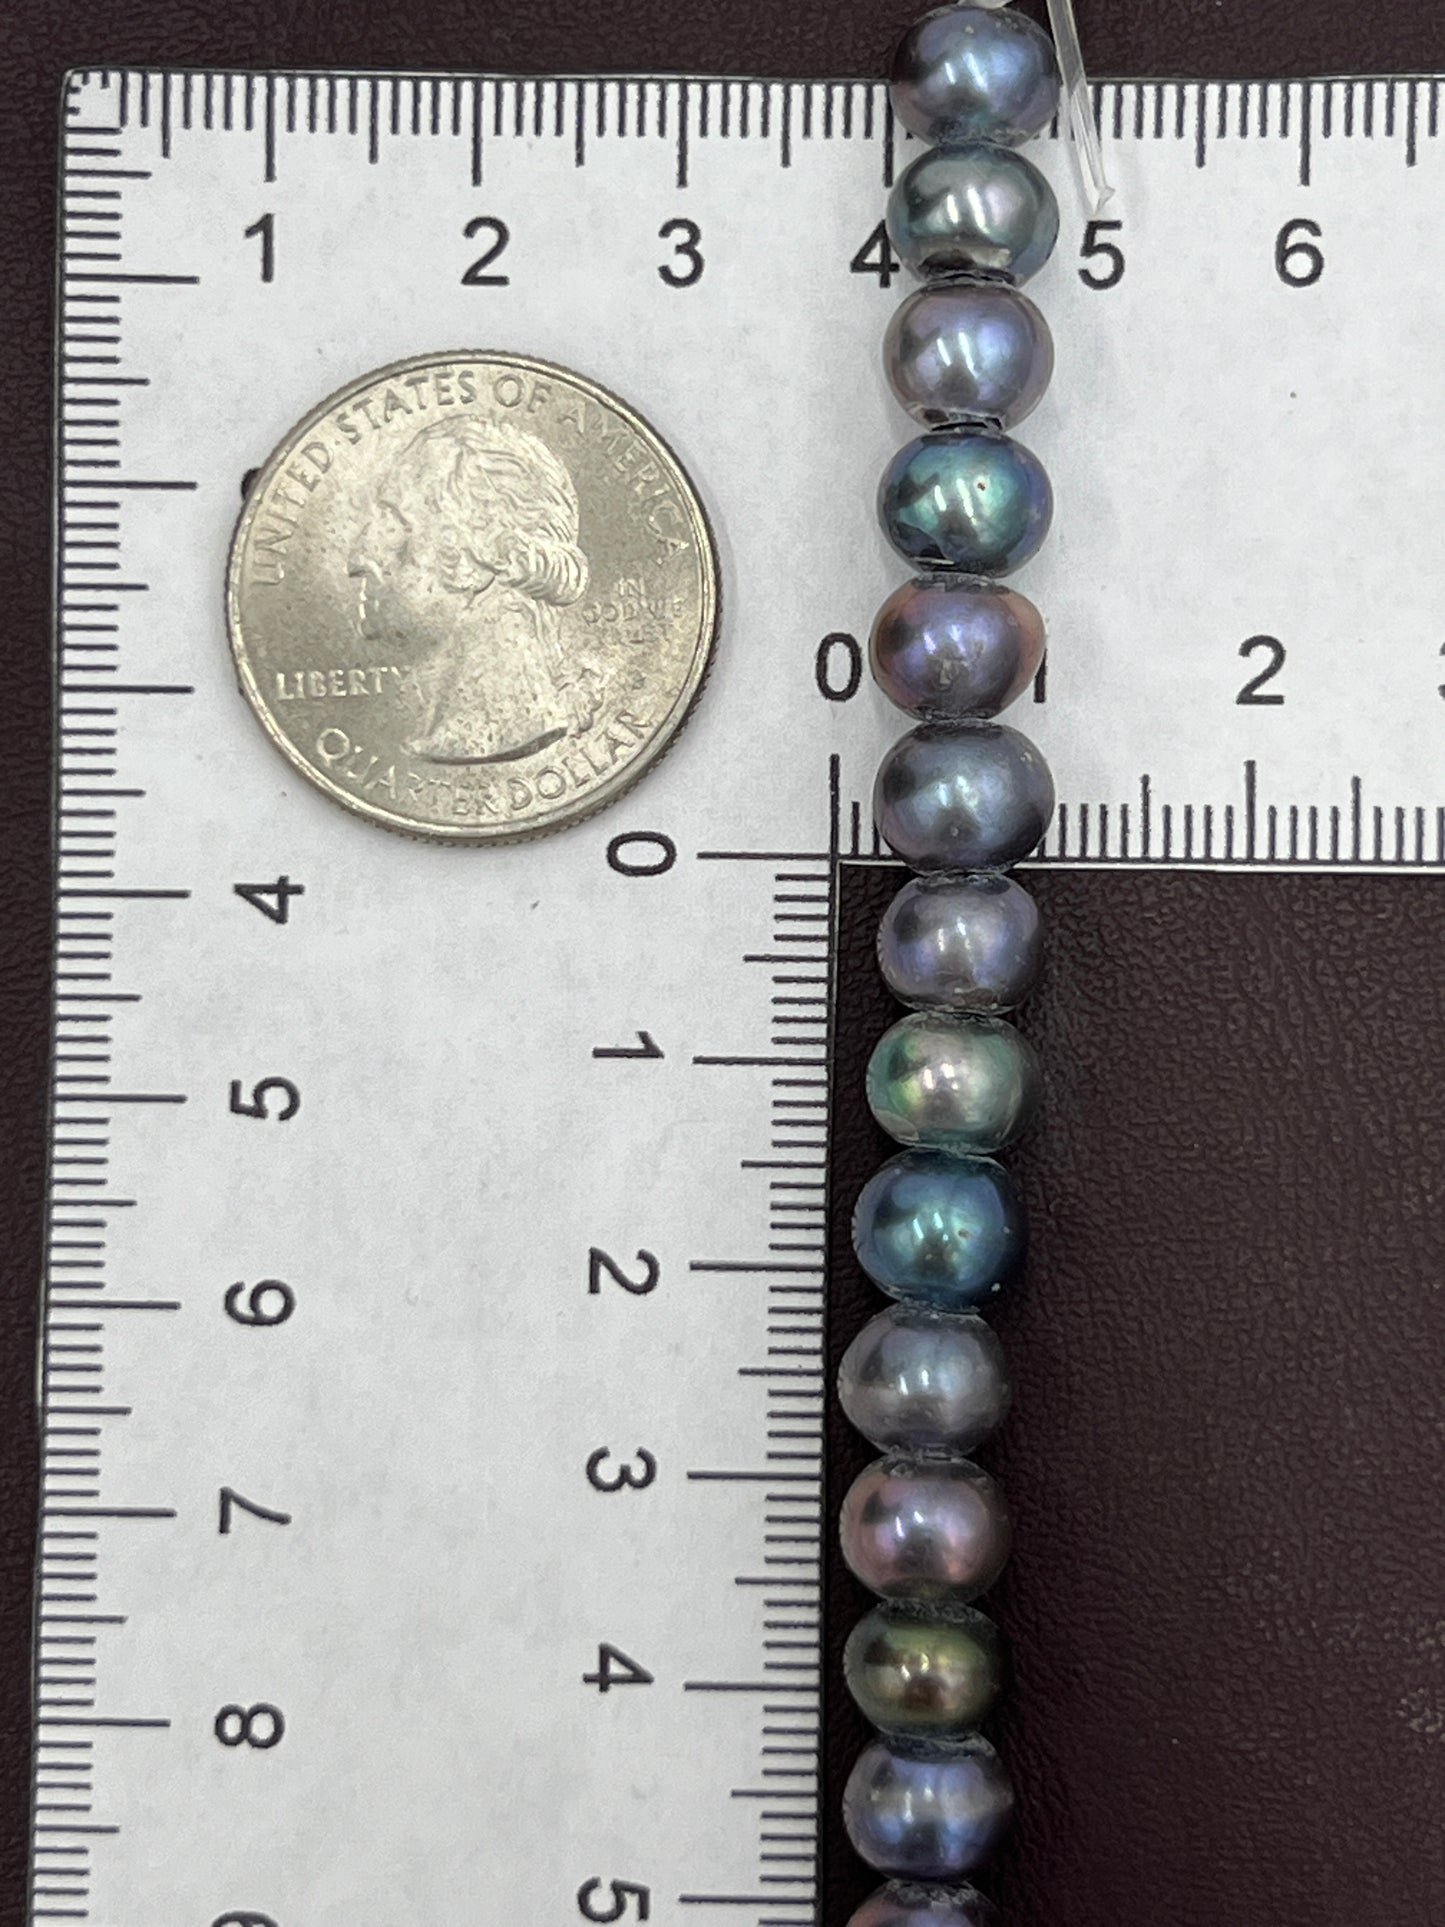 Freshwater Pearl 8mm Large Hole 1 Strand (20cm)